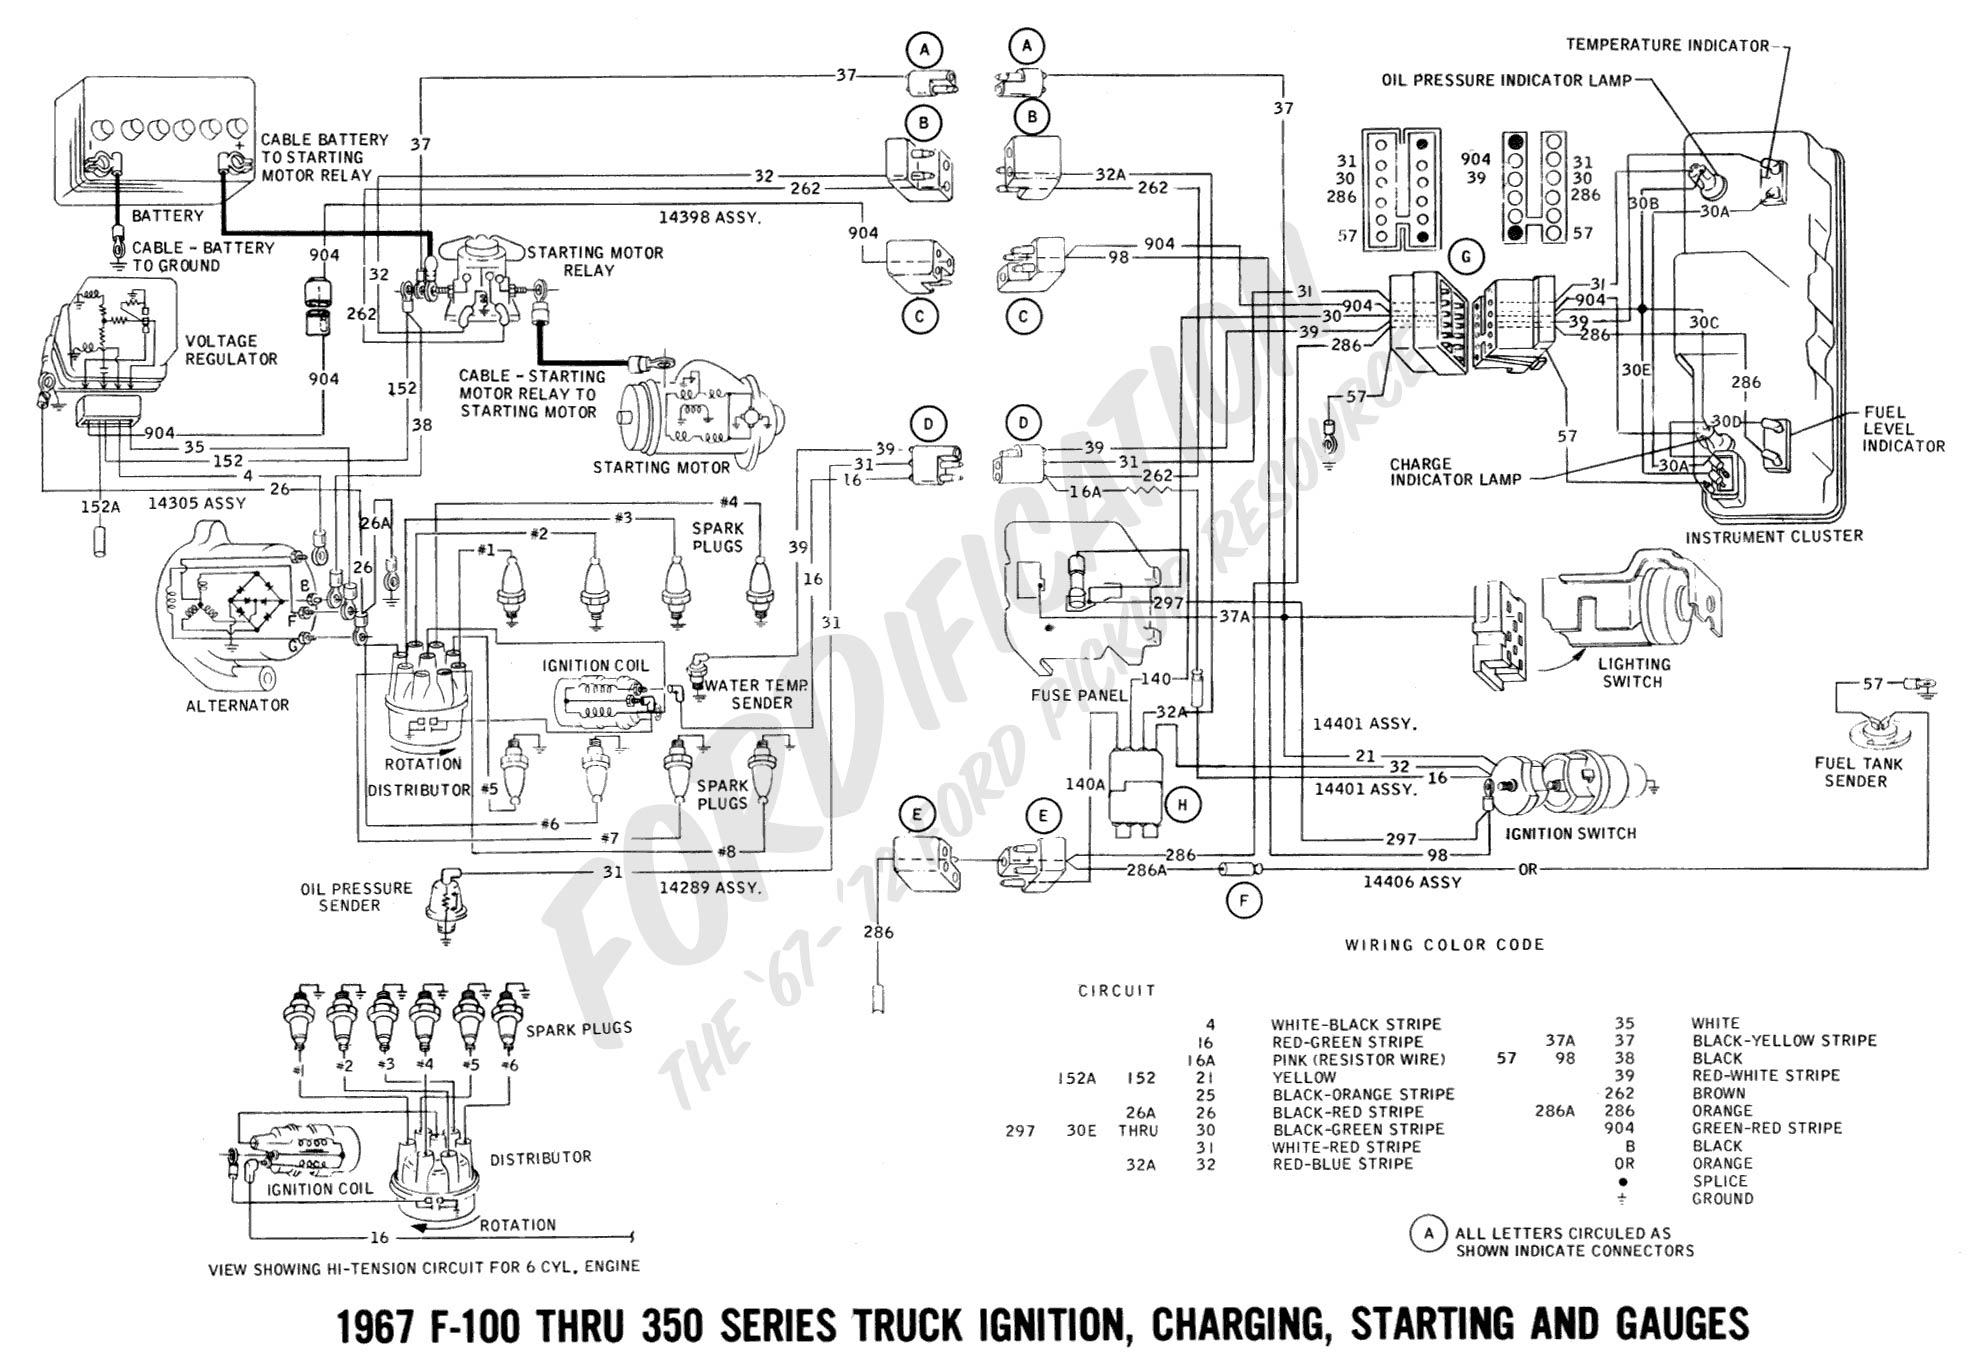 1969 Mustang Ignition Switch Wiring Diagram | Wiring Diagram